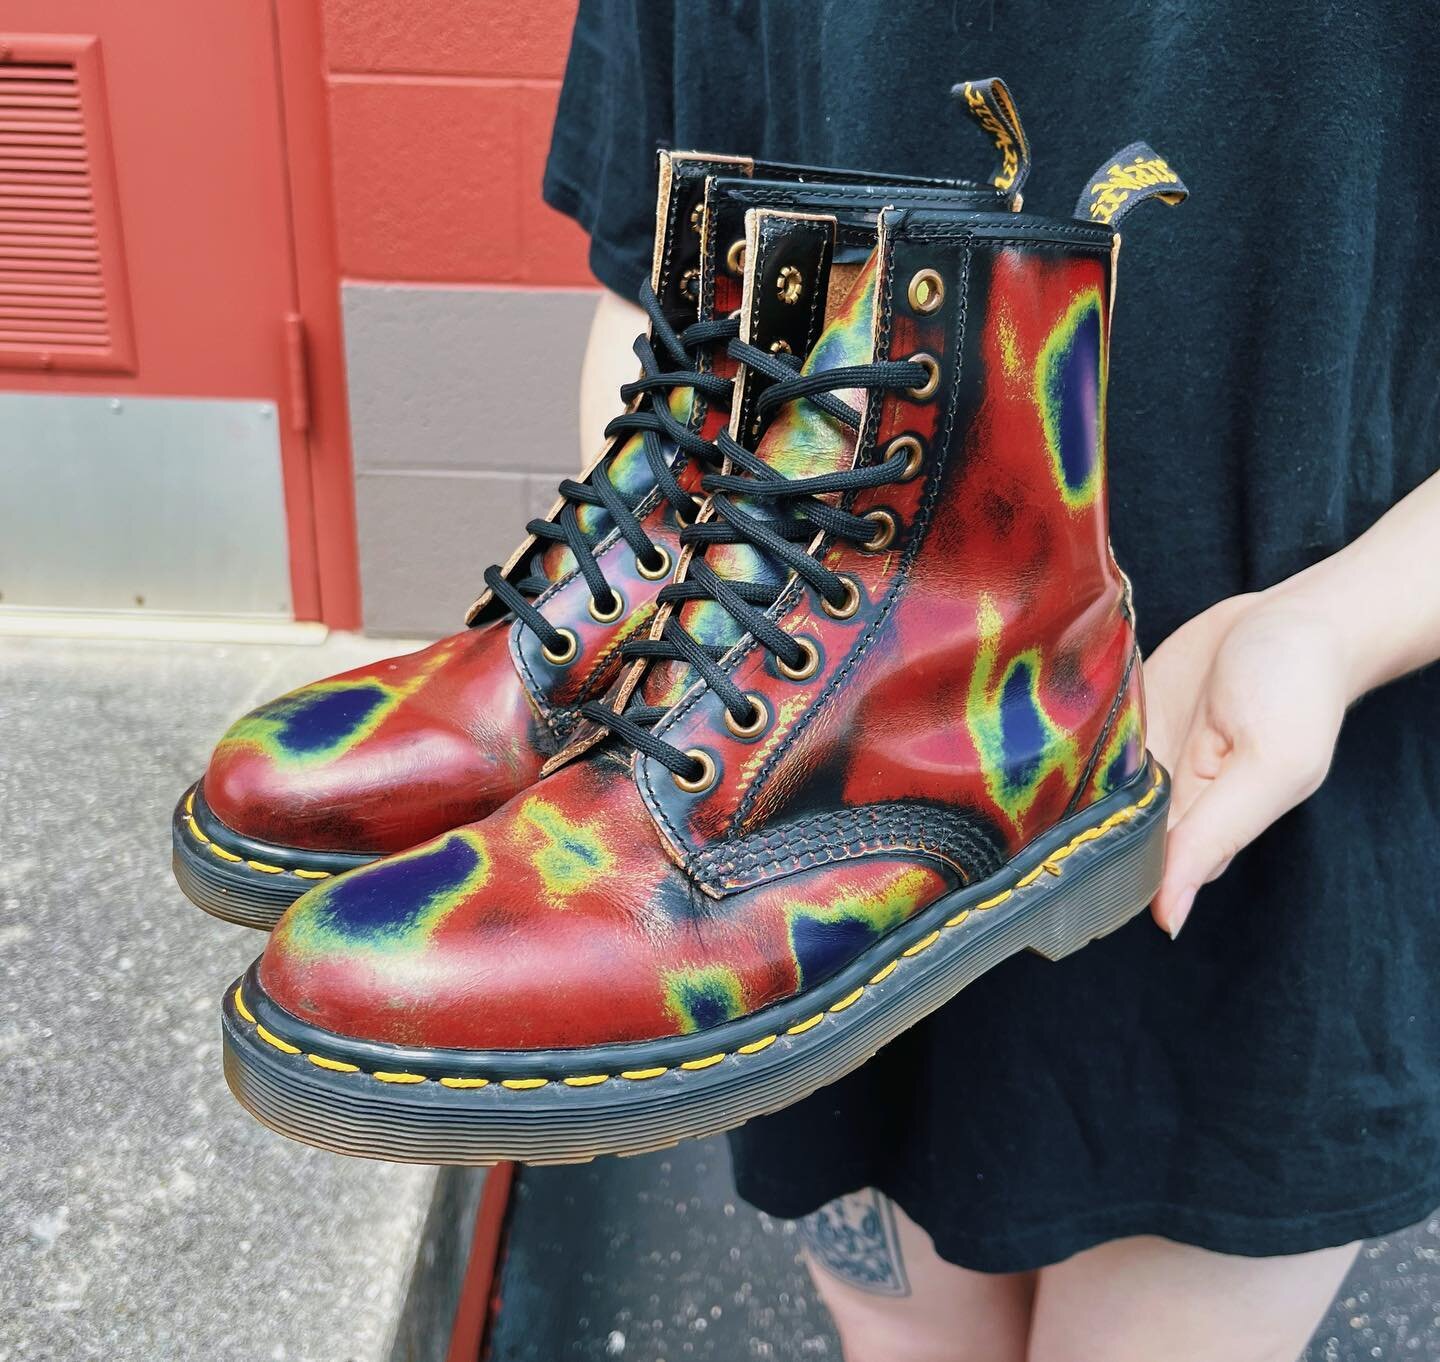 Vintage 90&rsquo;s Dr. Martens 
🧪&rdquo;Rub Off Acid&rdquo;🧪
Women&rsquo;s size 7 &bull; $200
In store at PX Knoxville 

.
.
.
@drmartensofficial #drmartens #90svintage #ruboffdocs #knoxville #buyselltrade #planetxchange